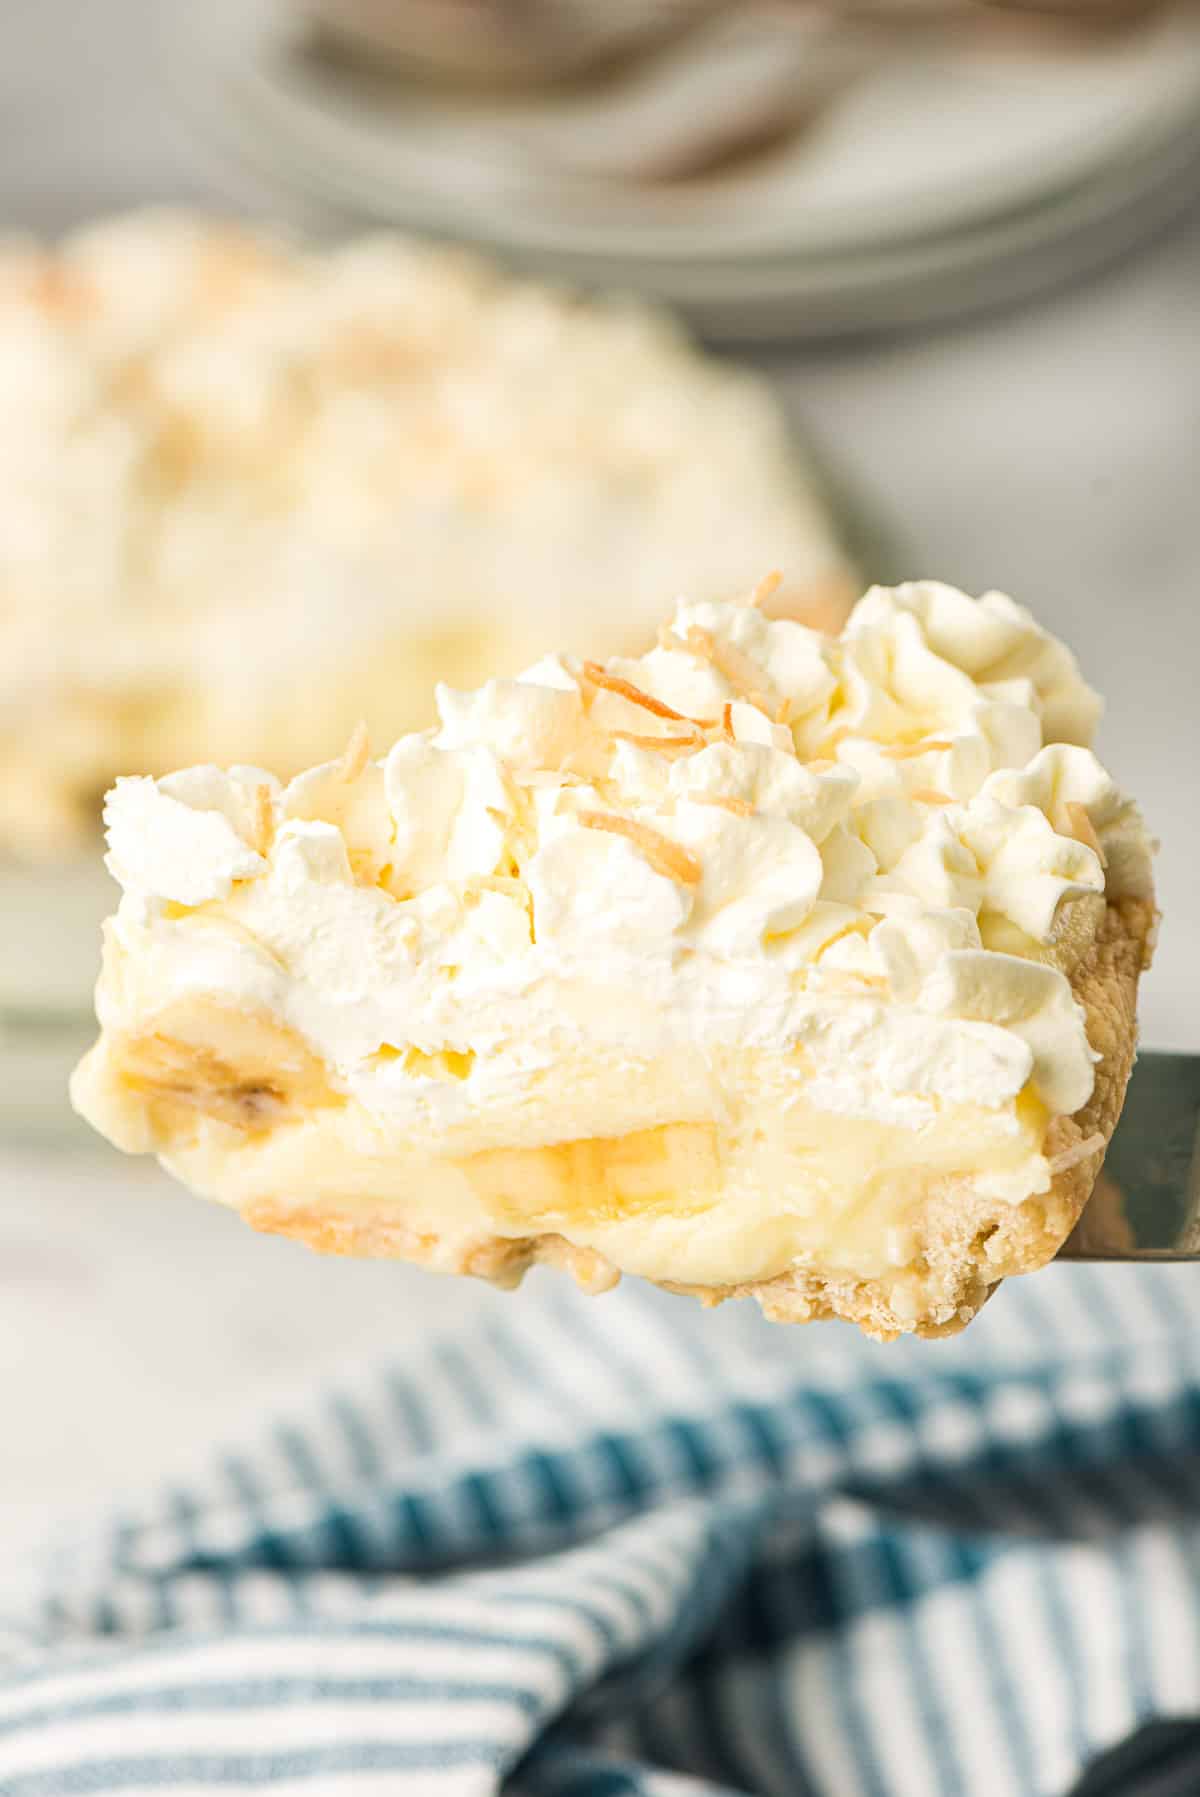 A spatula lifts a slice of Old Fashioned Banana Cream Pie.